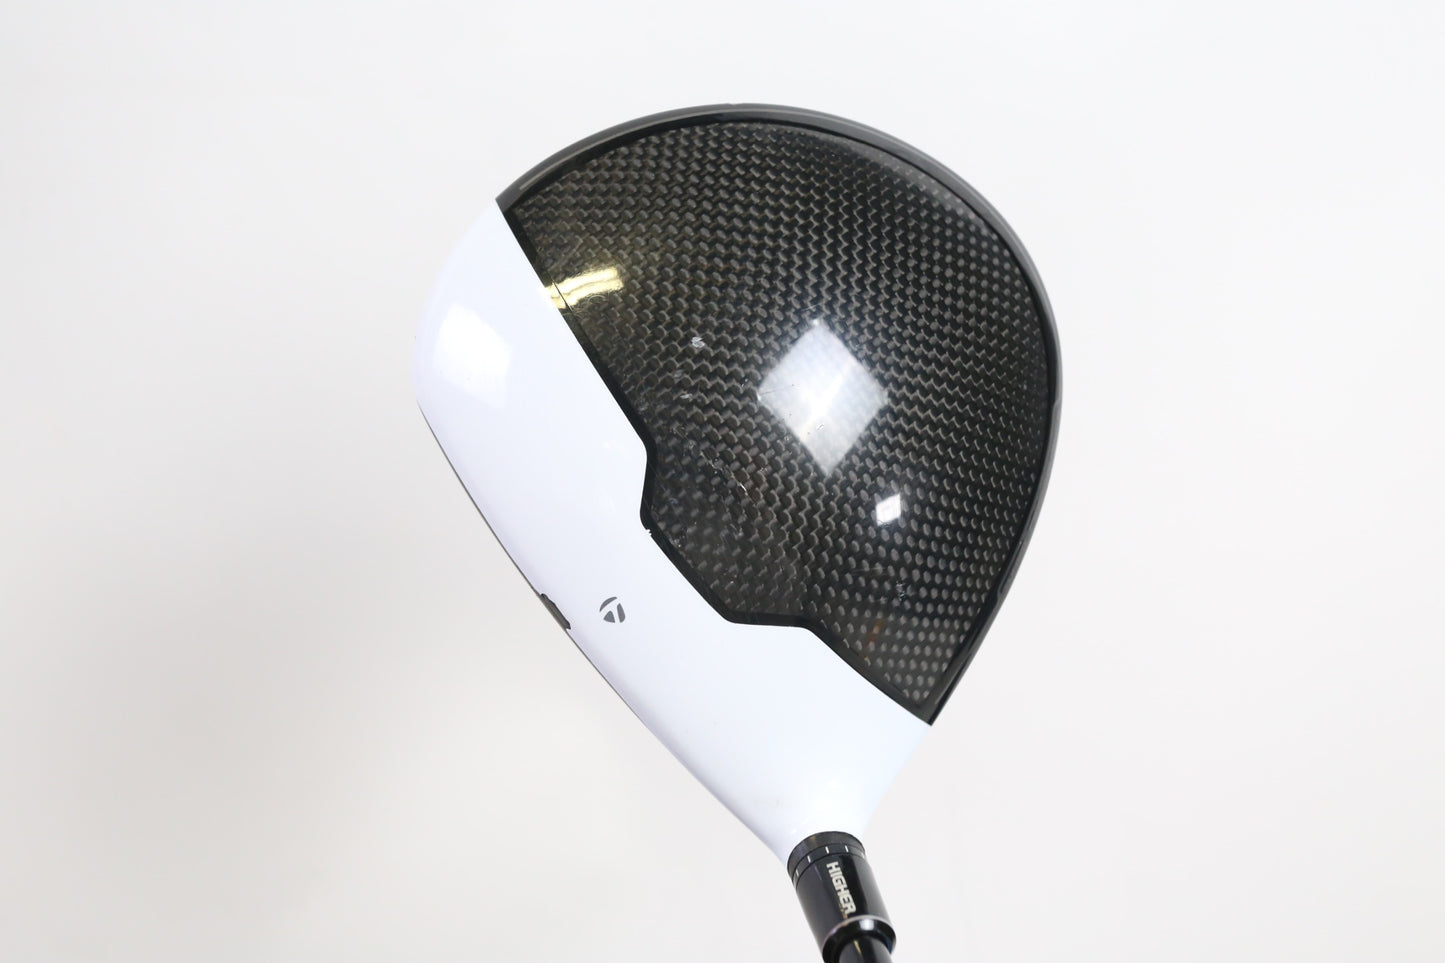 Used TaylorMade M1 460 Driver - Right-Handed - 12 Degrees - Seniors Flex